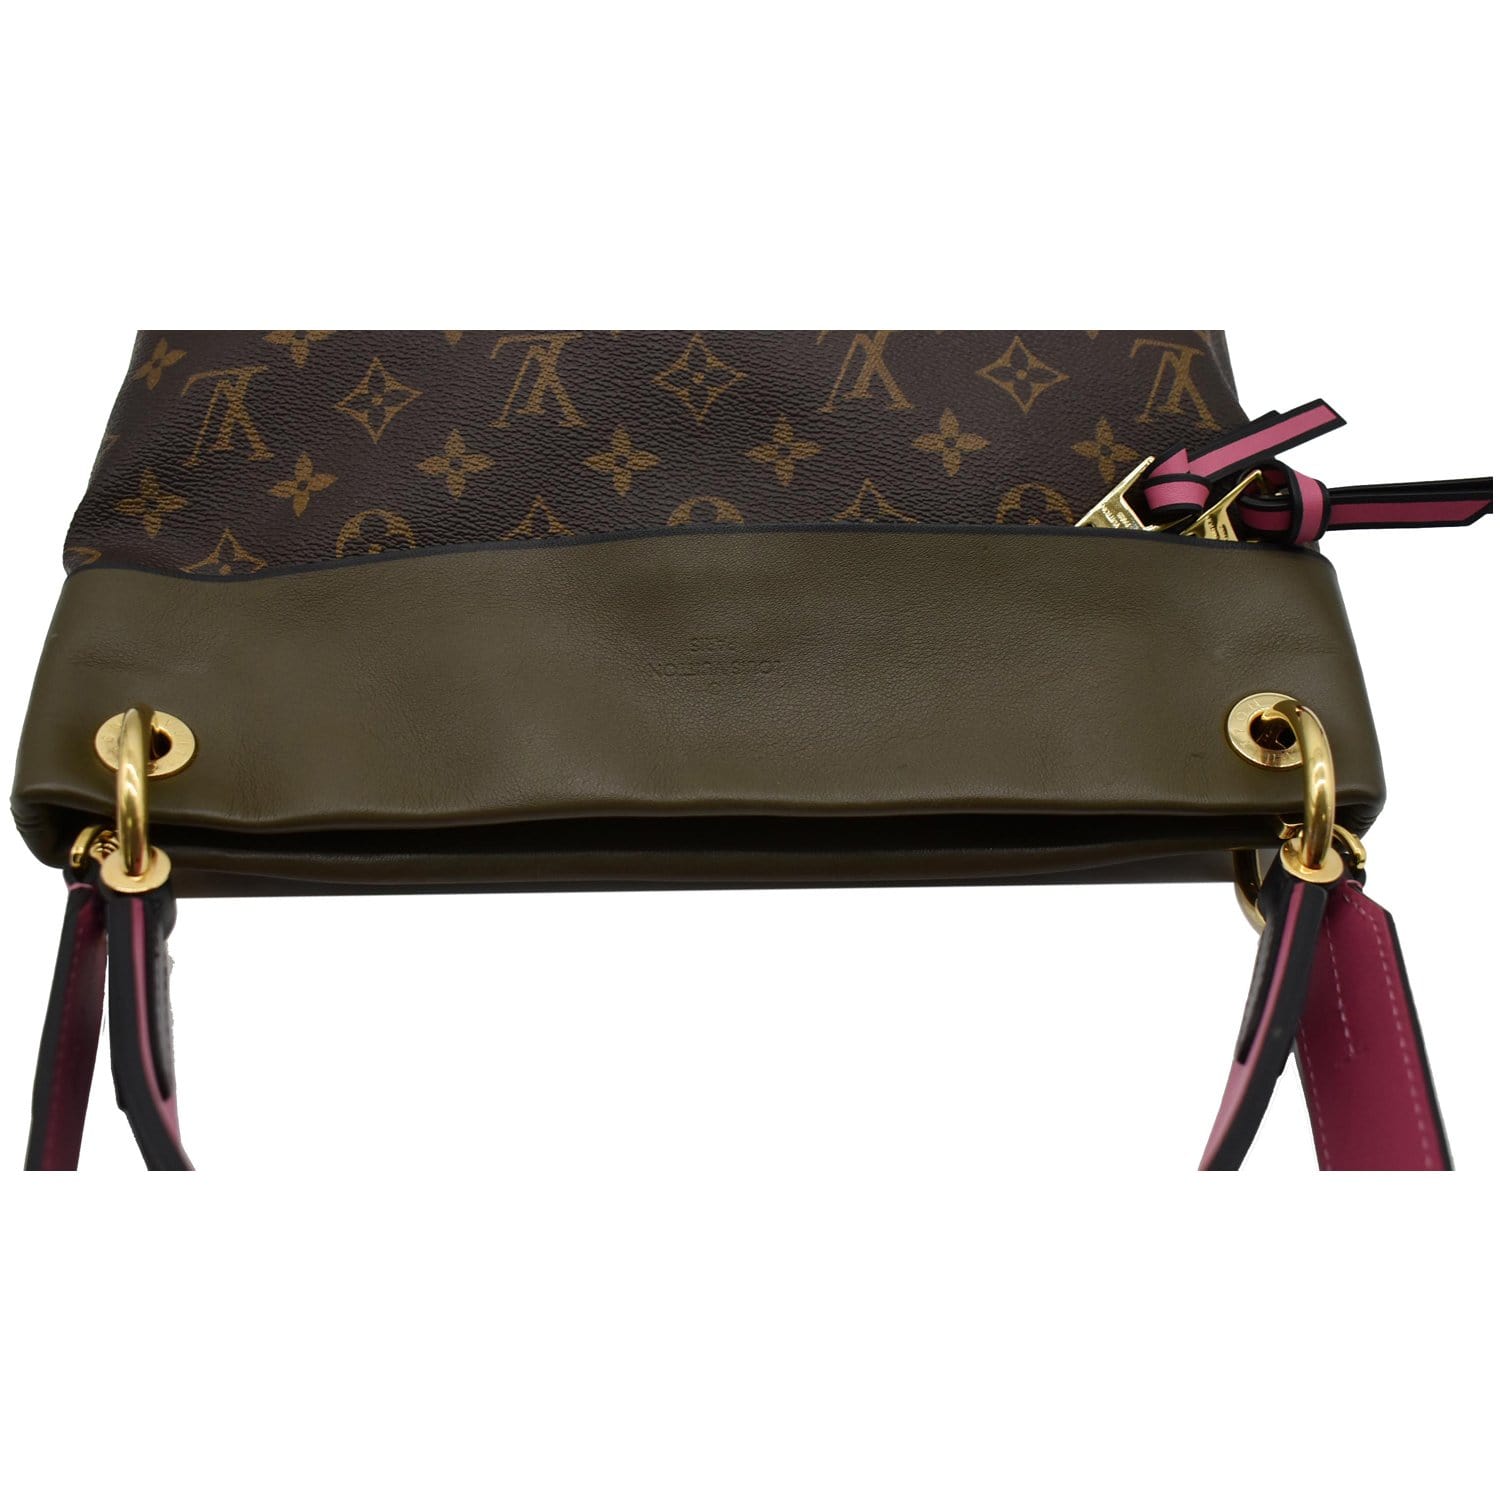 (1-259/ LV-TUILERIES-Besace-DS) Bag Organizer for LV Tuileries Besace